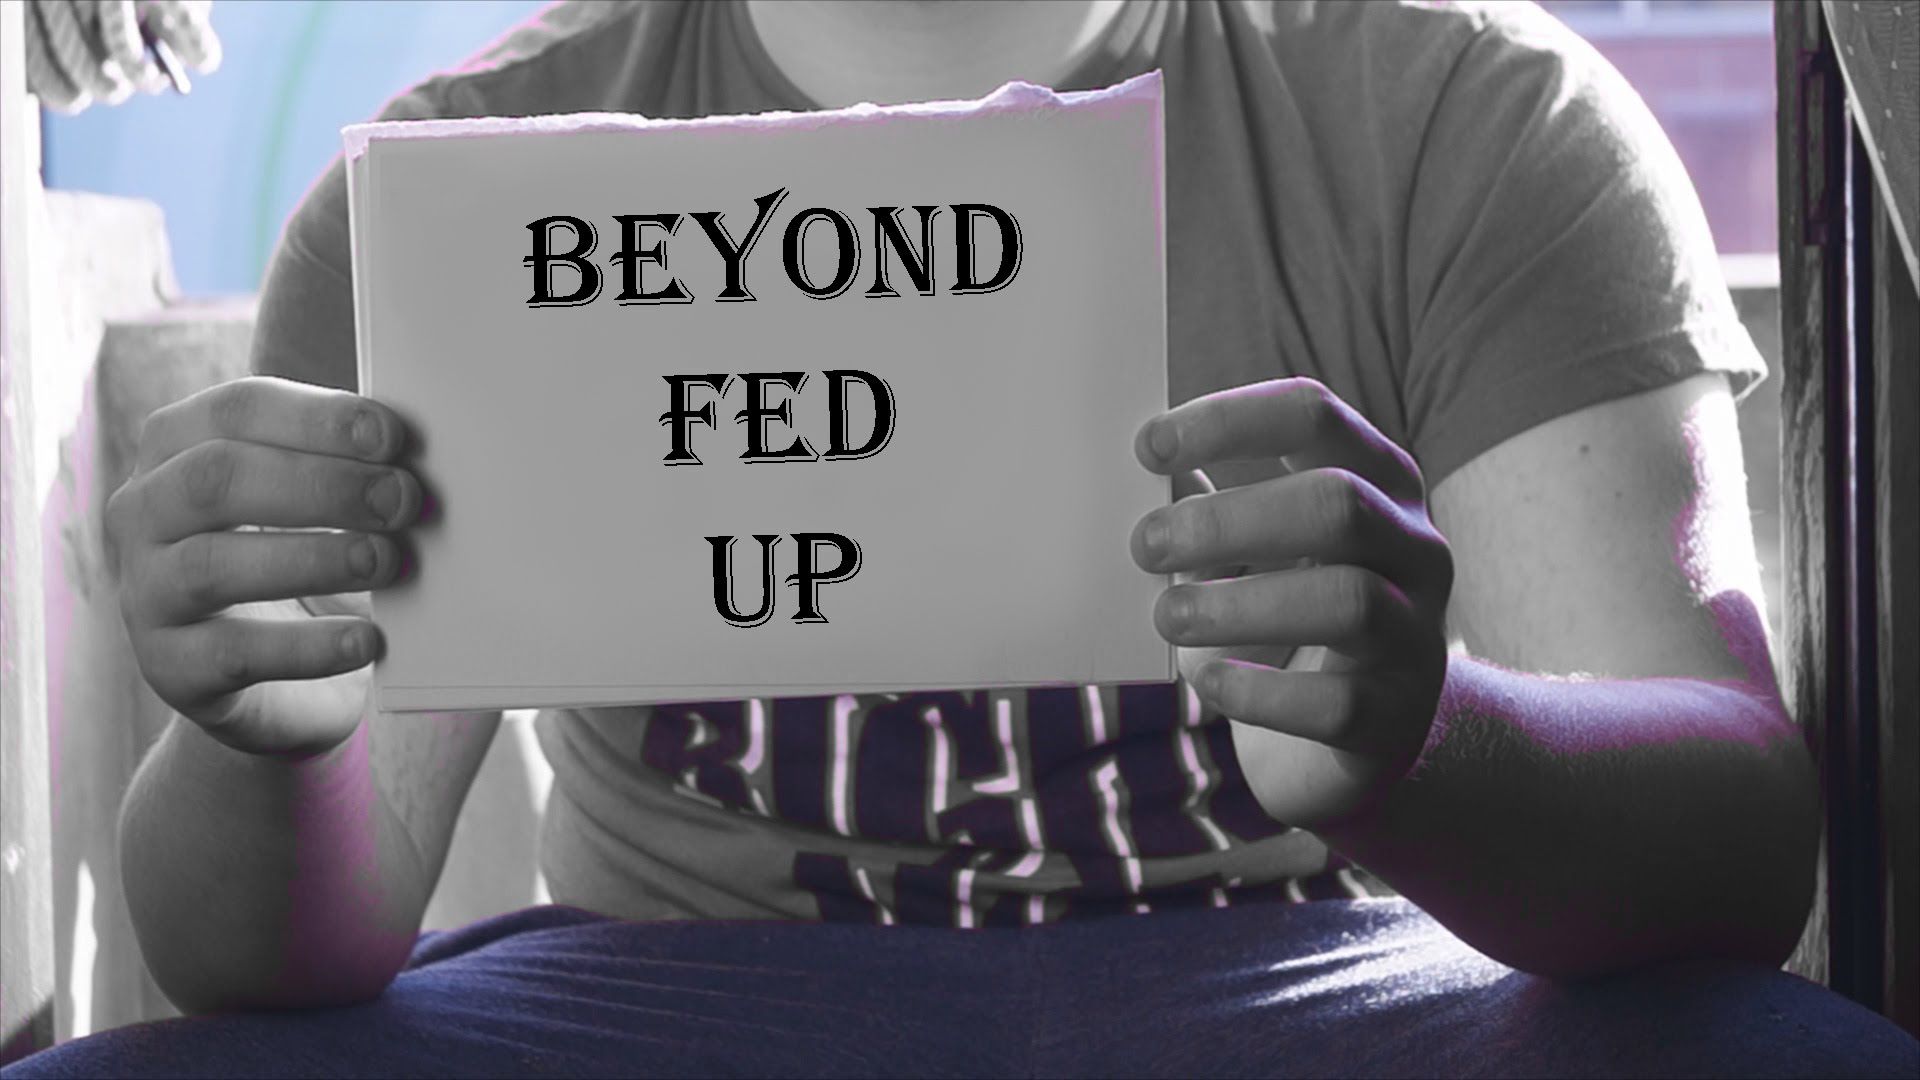 Beyond Fed Up: Questions in lower 3rd - YouTube